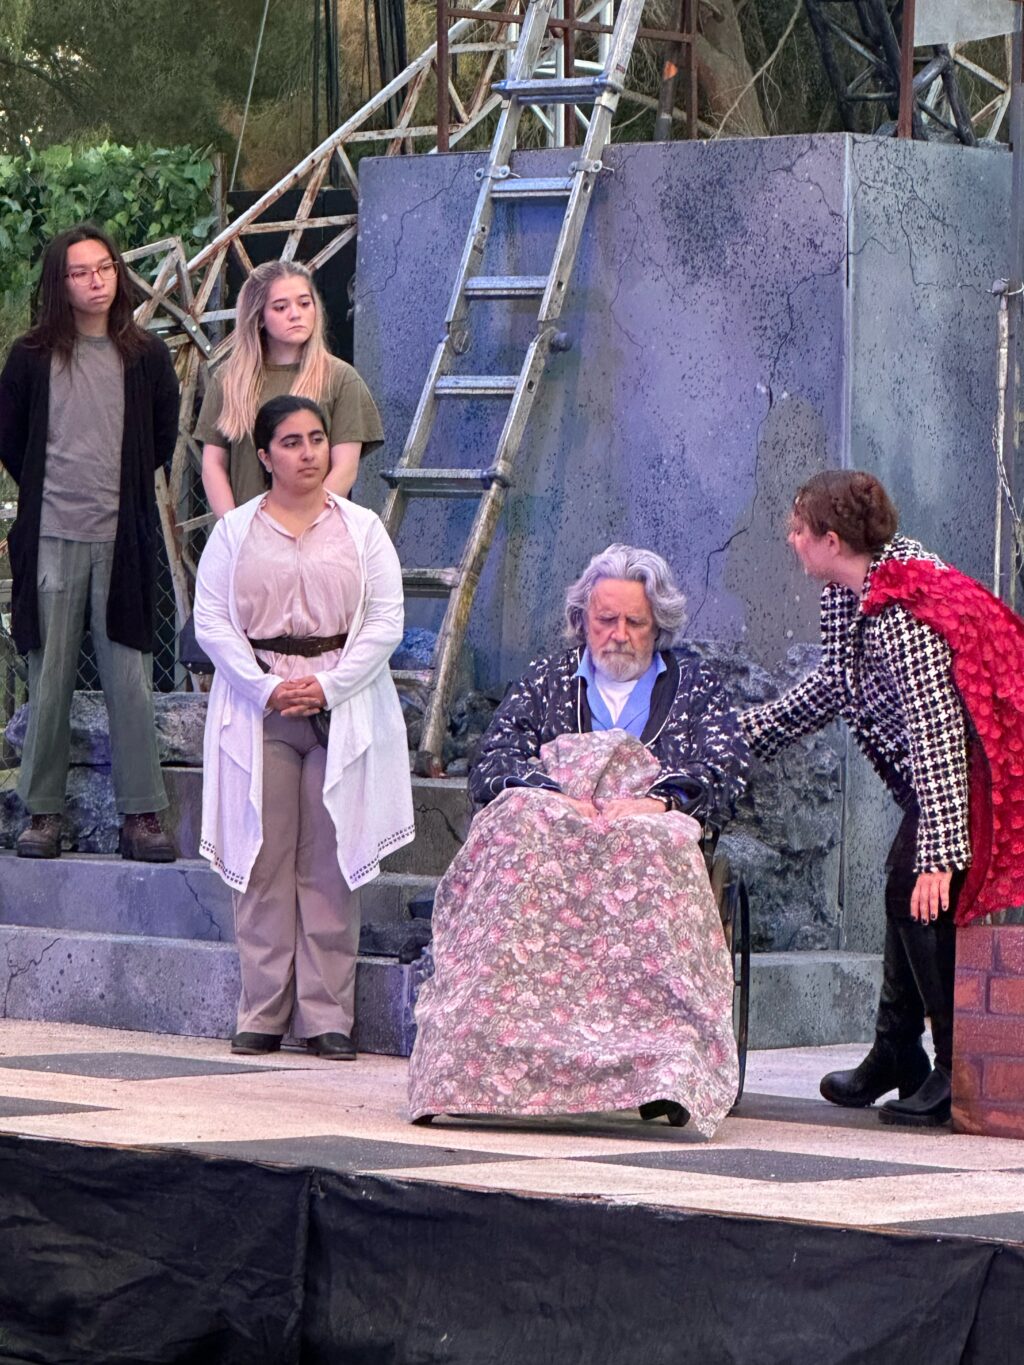 A NoHo Arts theatre review of Kingsmen Shakespeare Company’s production of “King Lear” by William Shakespeare, directed by Michael Arndt, starring Lane Davies, running through August 6.